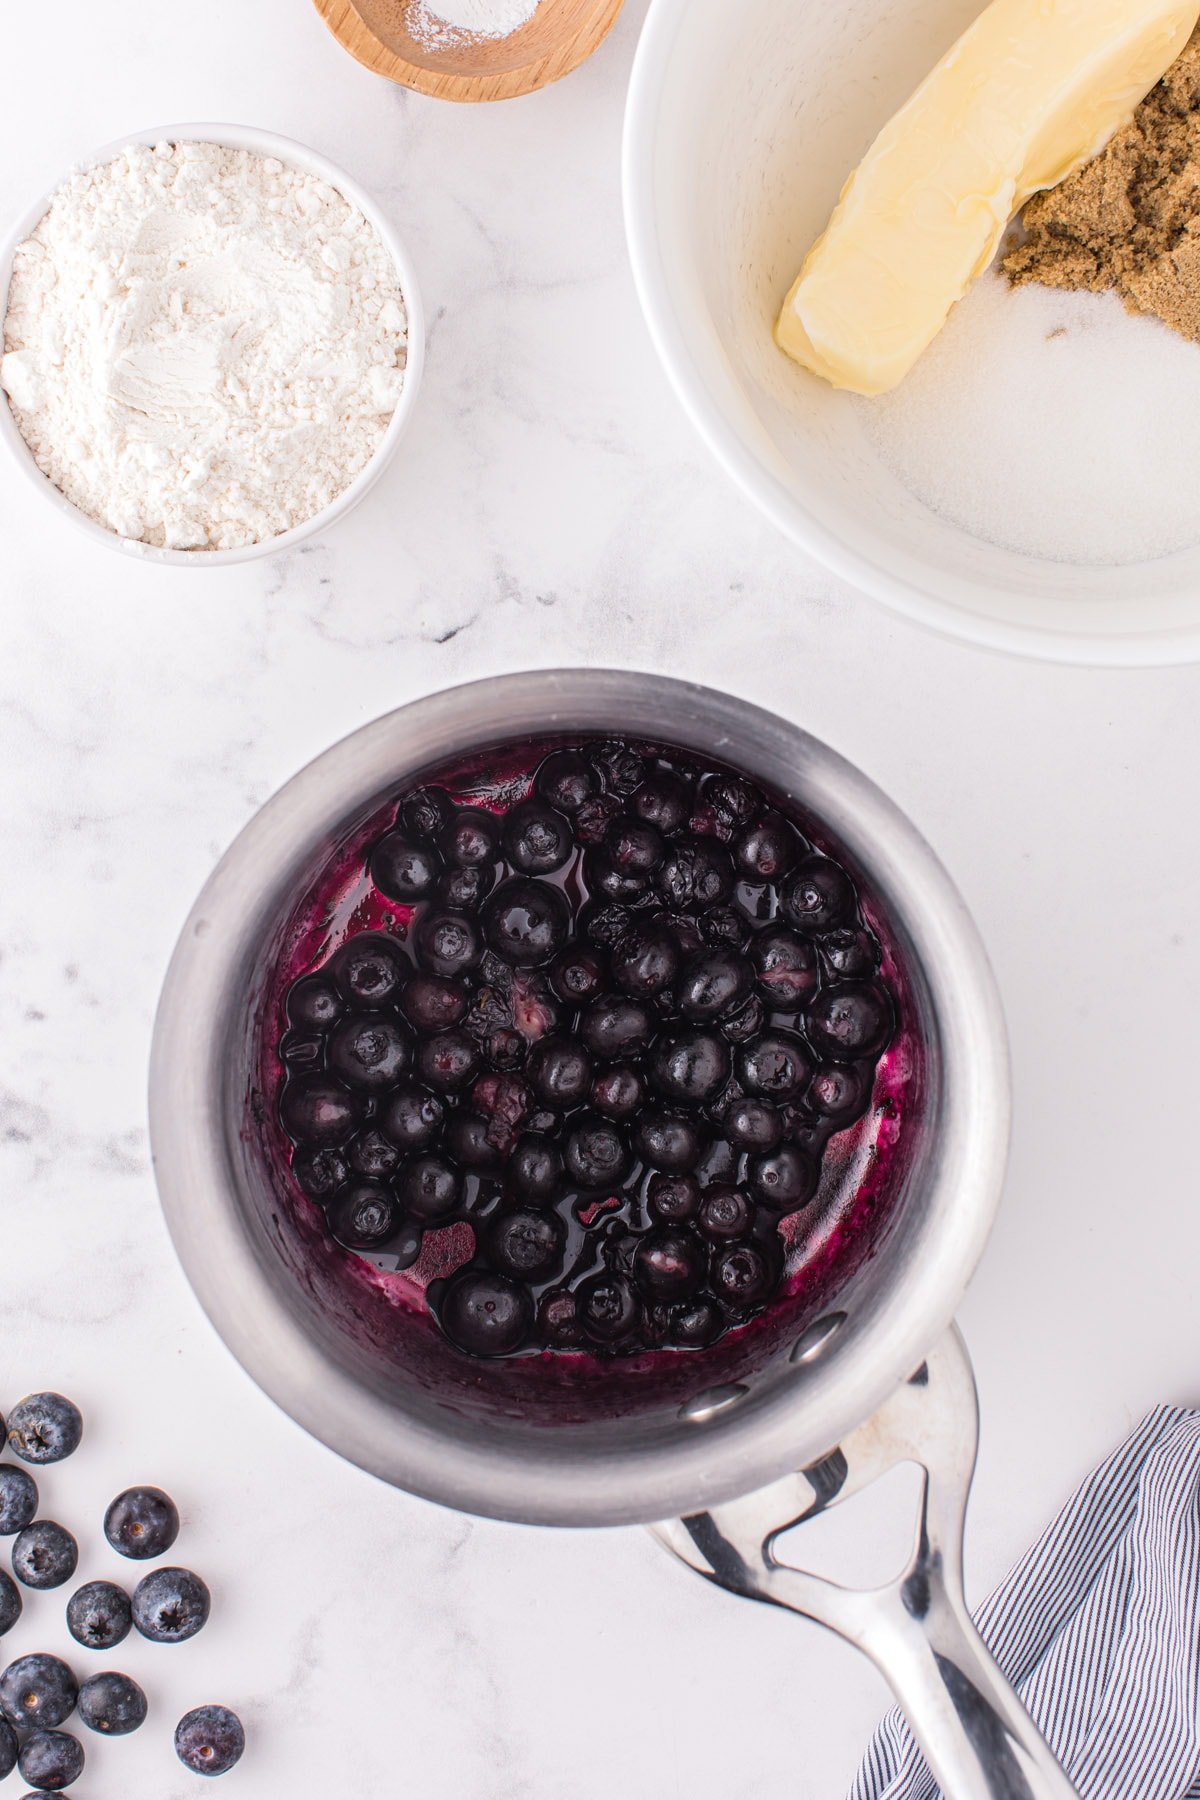 heat the blueberries in a pan